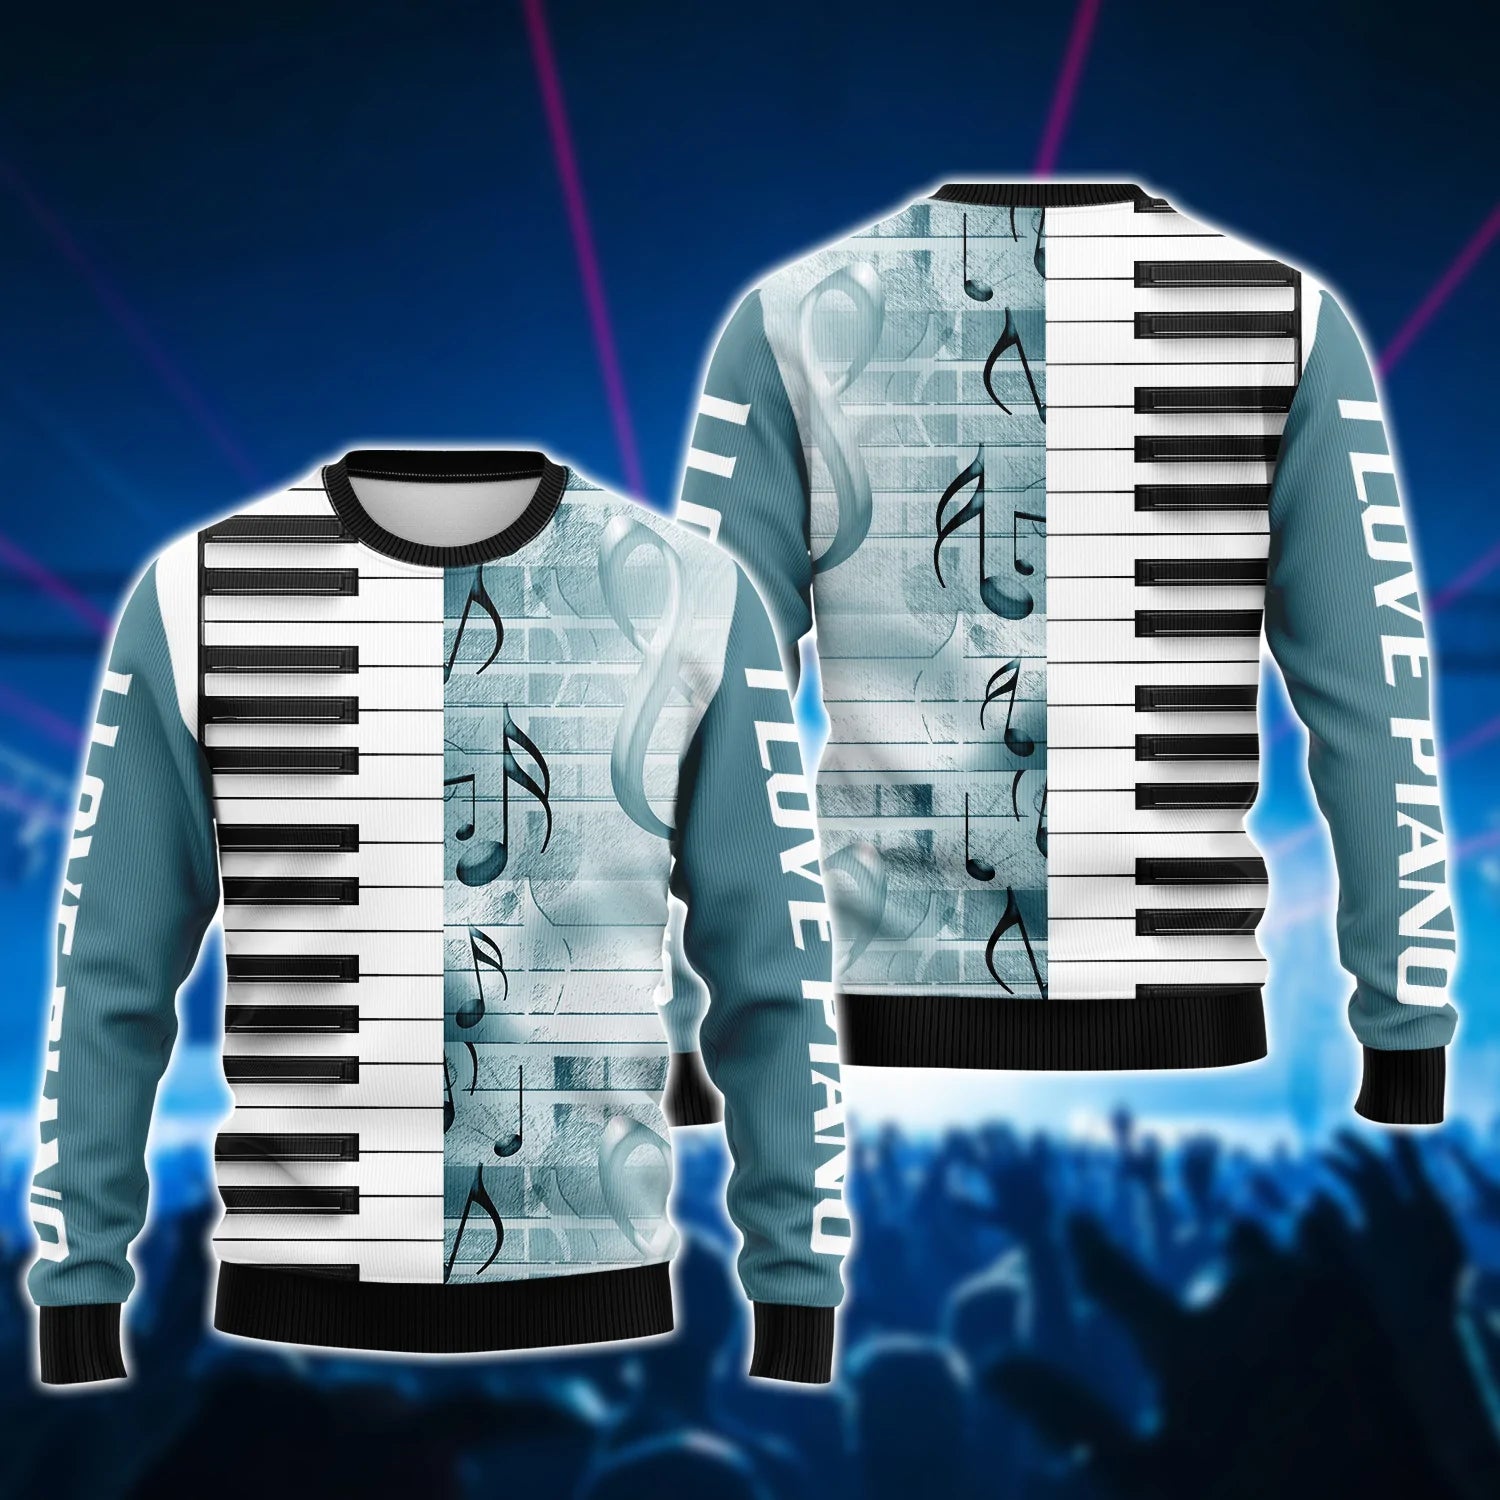 3D All Over Print Piano T Shirt/ I Love Piano 3D Hoodie Shirts/ Gift For Guitar Men Woman